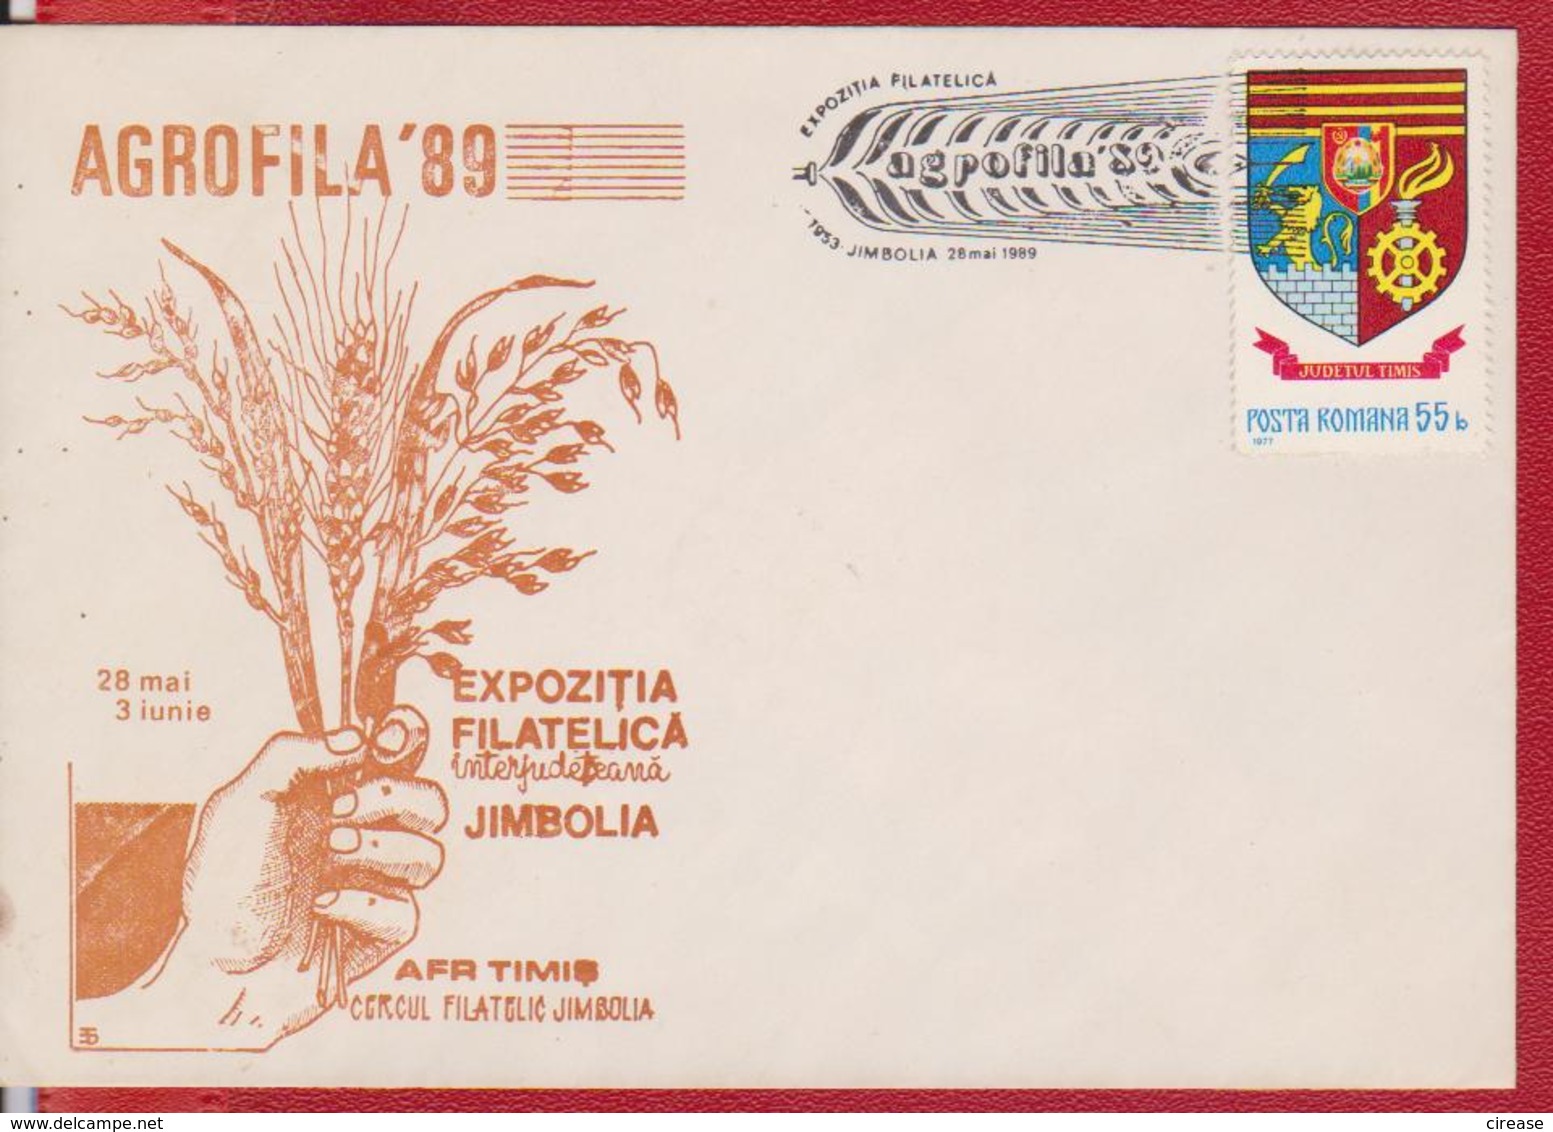 AGRICULTURE CEREALS ROMANIA SPECIAL COVER JIMBOLIA - Agriculture